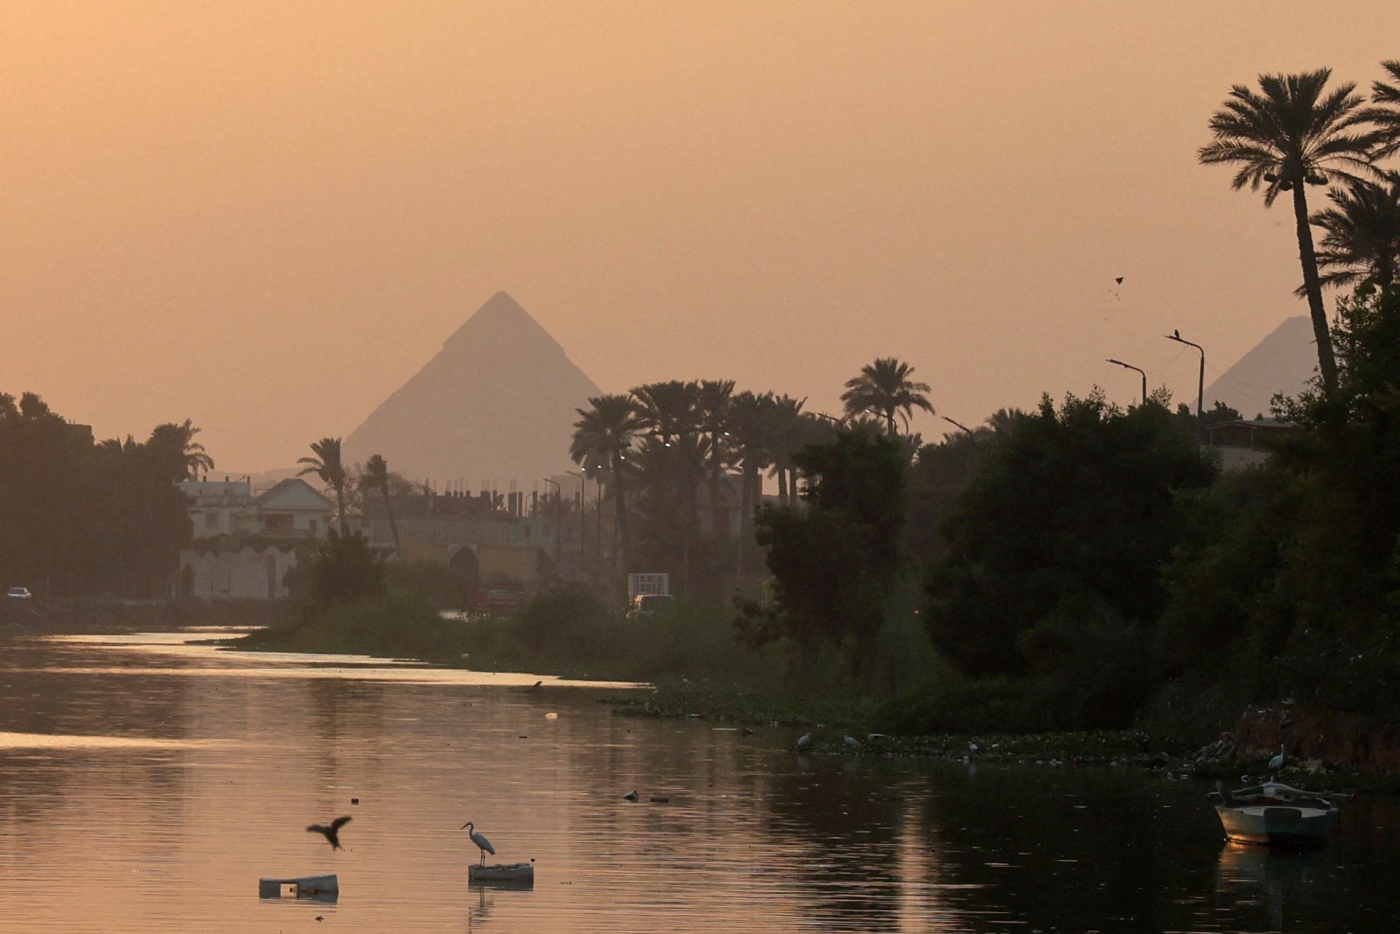 The Pyramid of Khufu seen before sunset behind a canal which flows into the River Nile on the outskirts of Cairo on 4 August 2022 (Reuters)